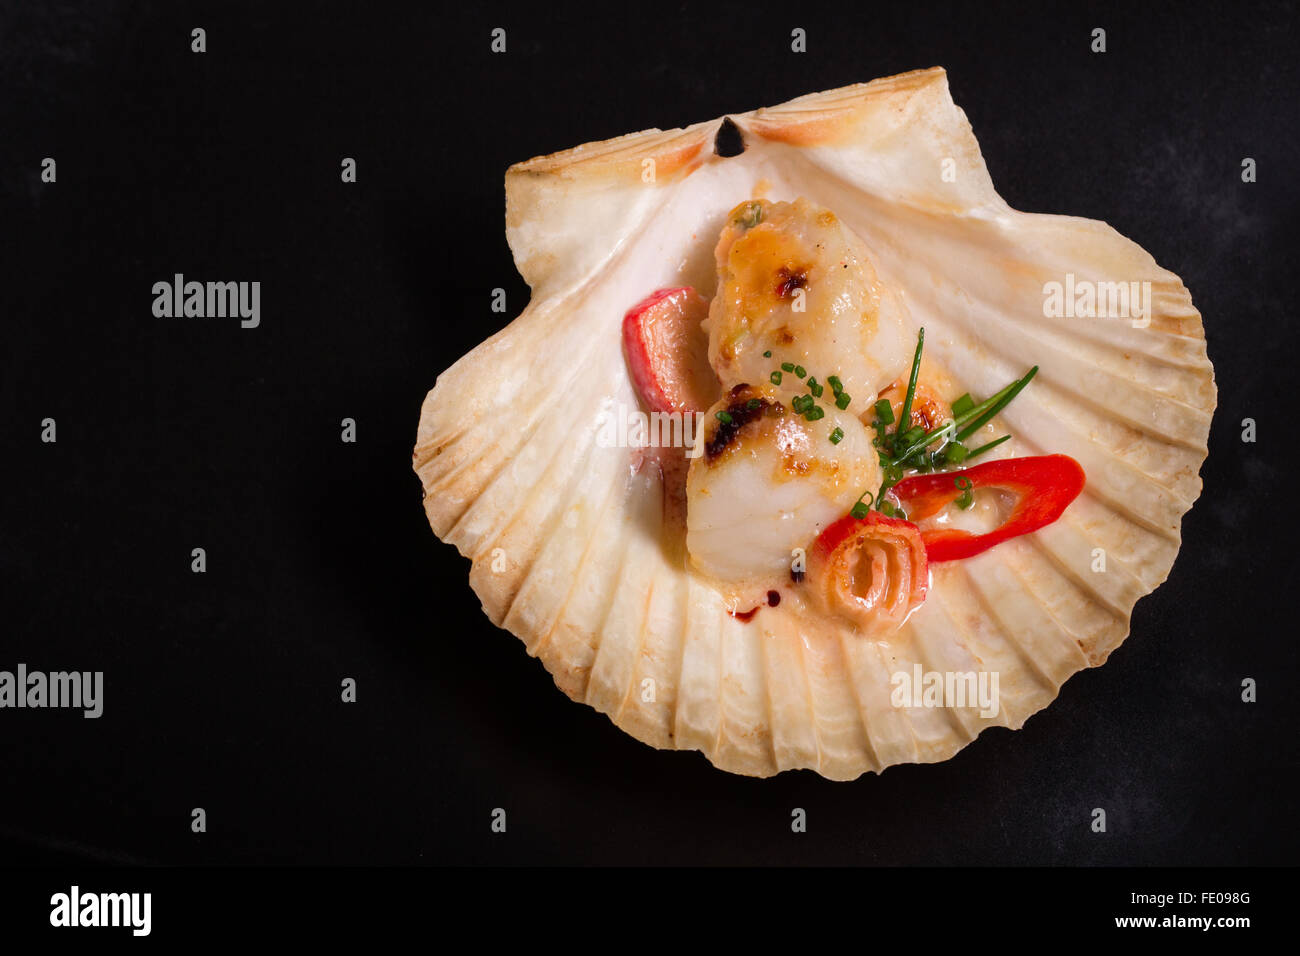 Luxury Scallop served on Scallop Shell decorated with red hot chilli slice and creamy sauce on black Background platter Stock Photo